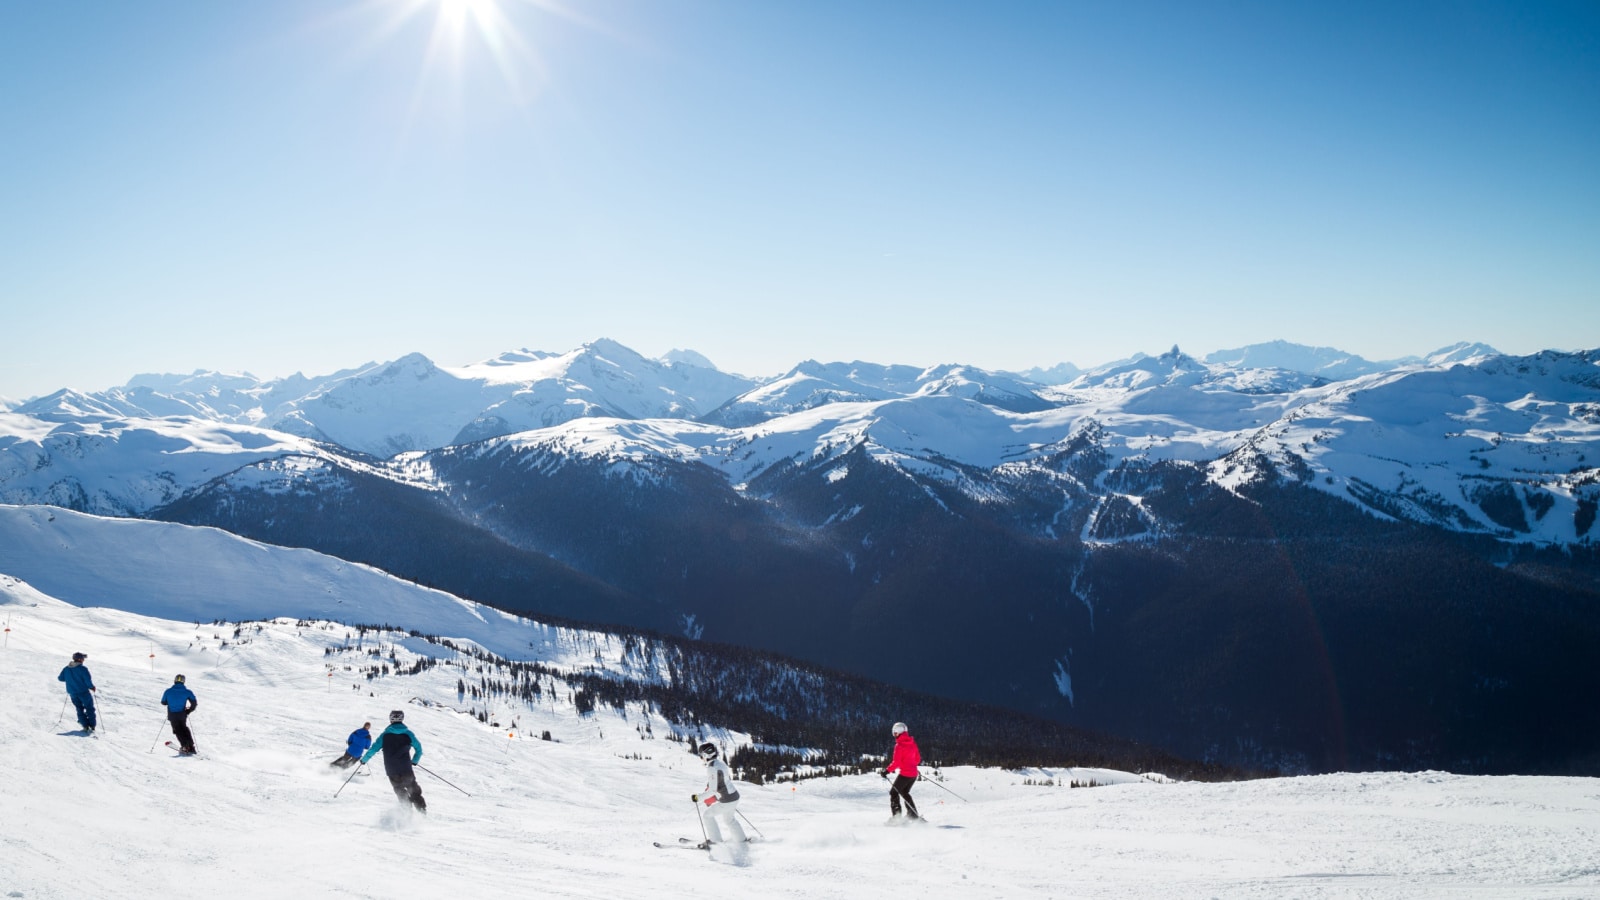 Skiers on a hill at the top of Blackcomb, 7th Heaven, with a view looking toward Whistler on a sunny day.